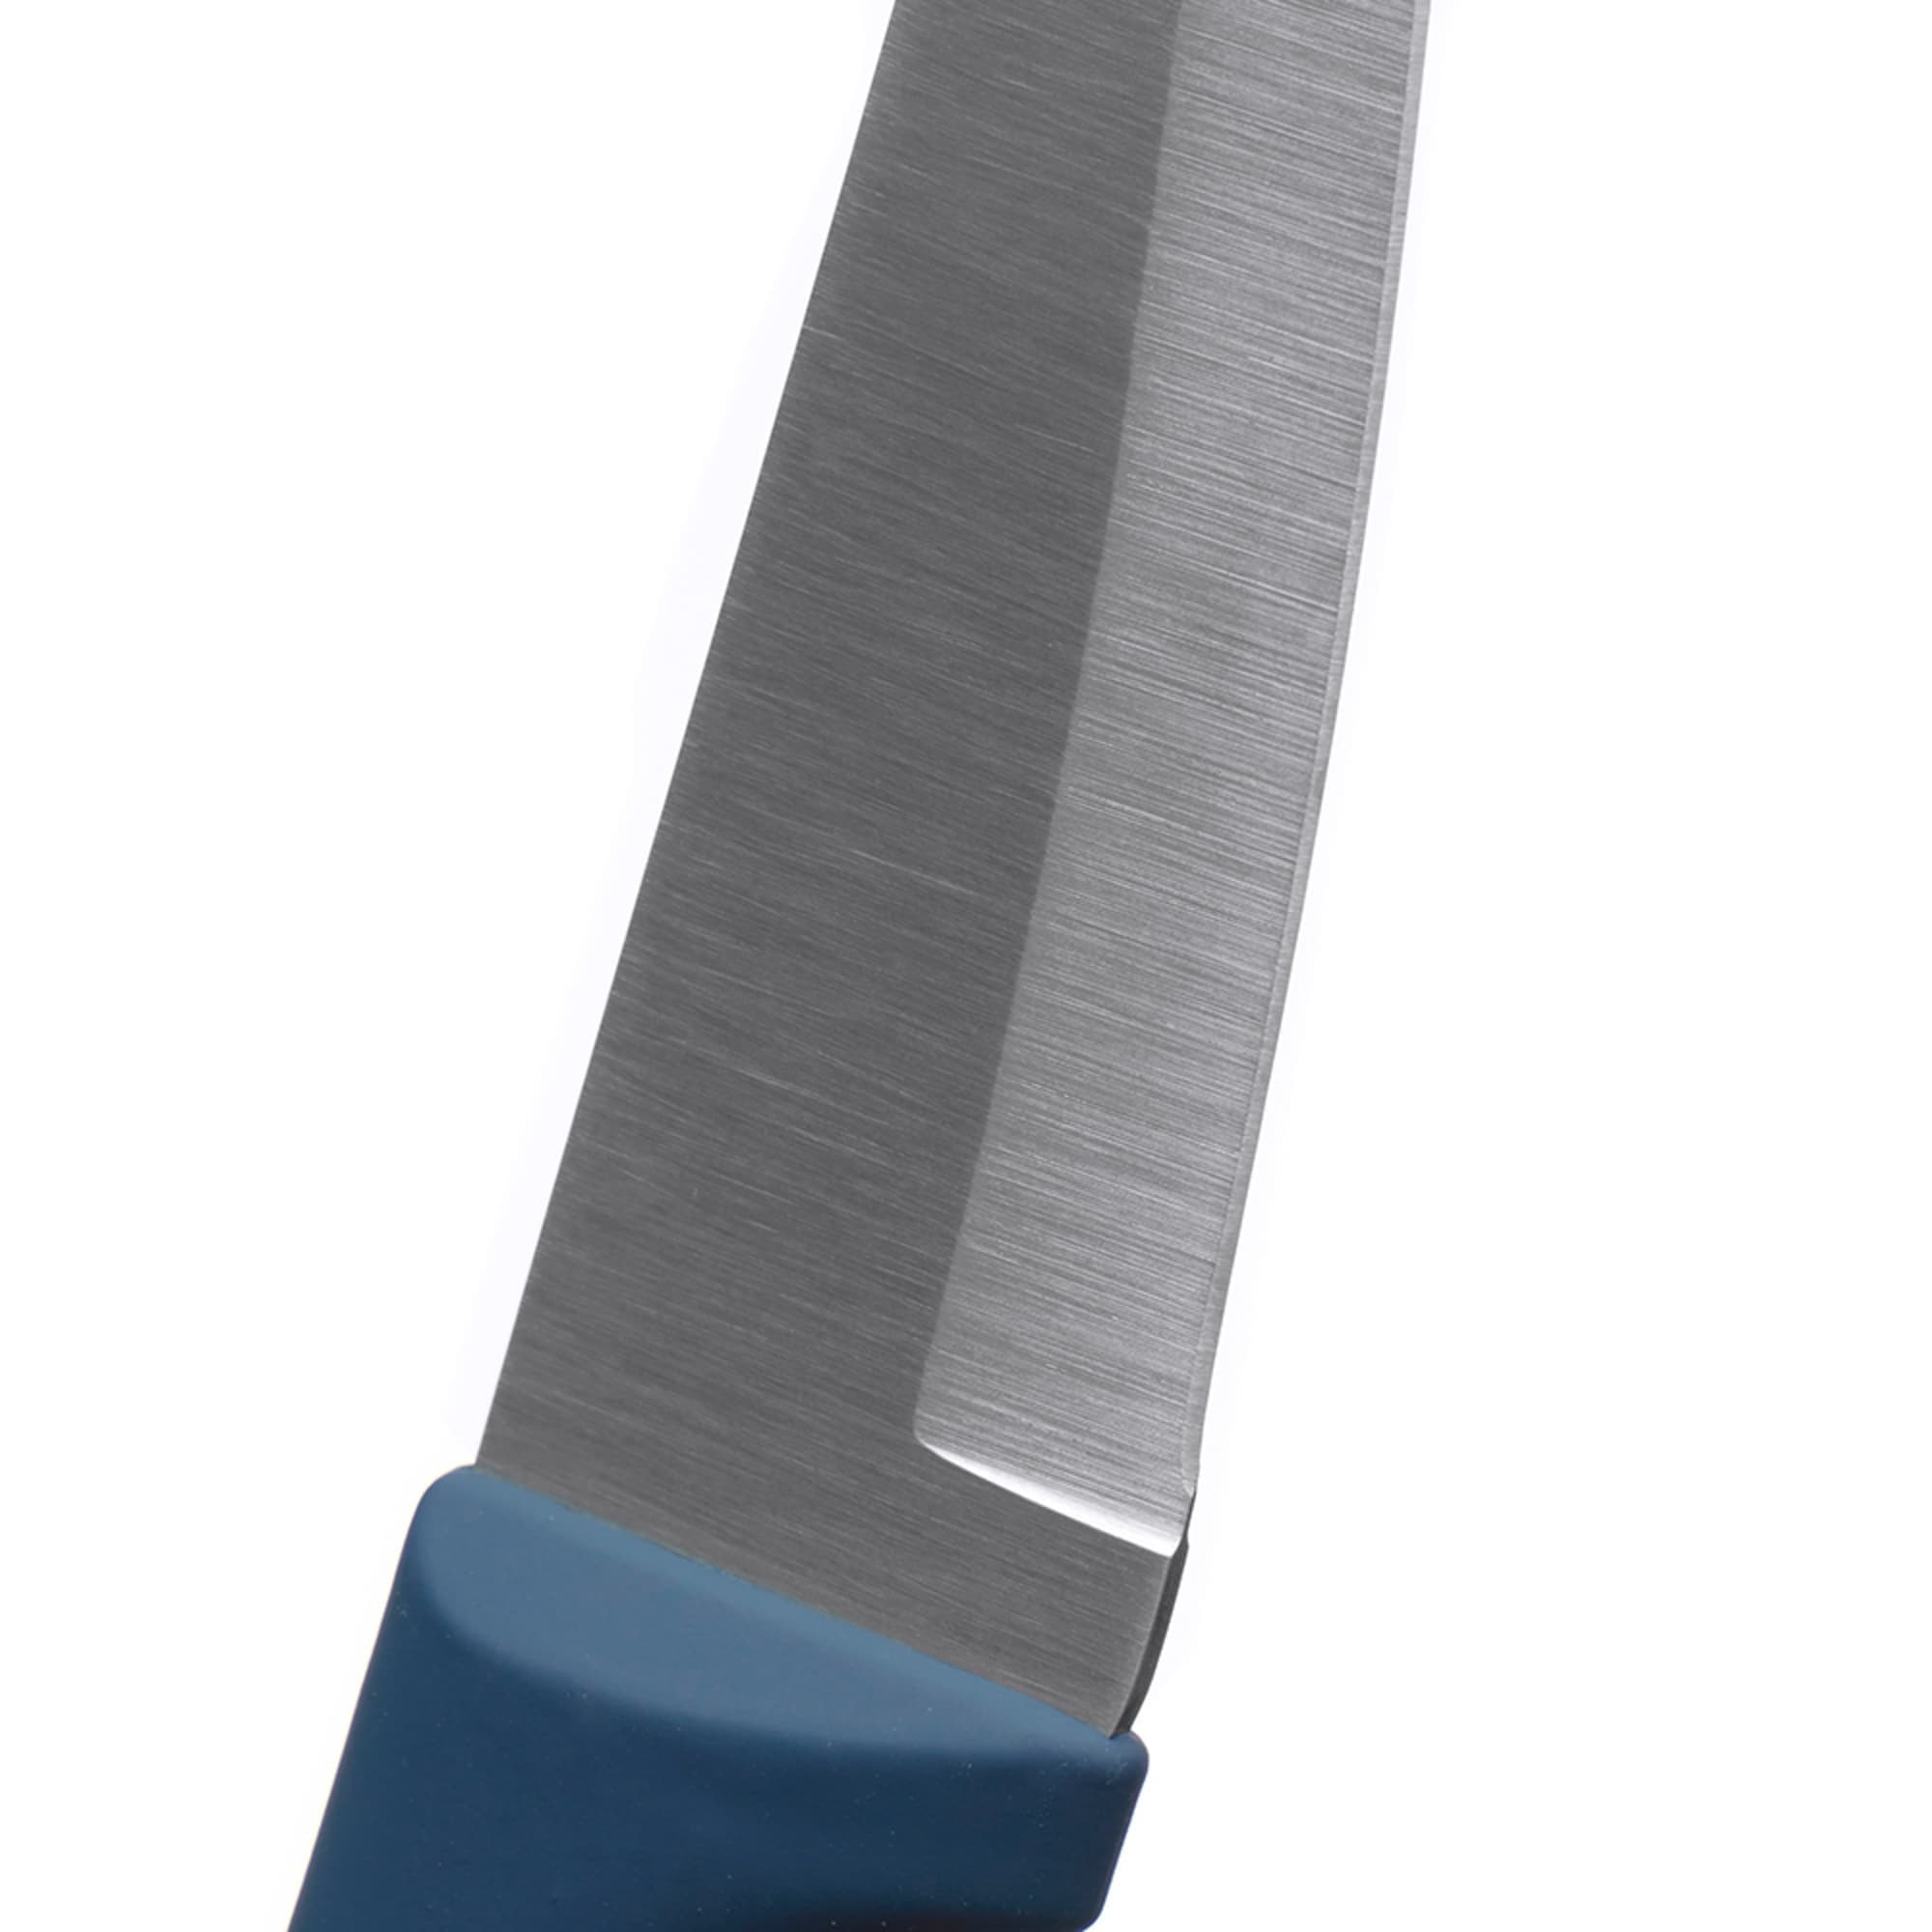 Michael Graves Design Comfortable Grip 3.5 inch Stainless Steel Paring Knife, Indigo $2.00 EACH, CASE PACK OF 24